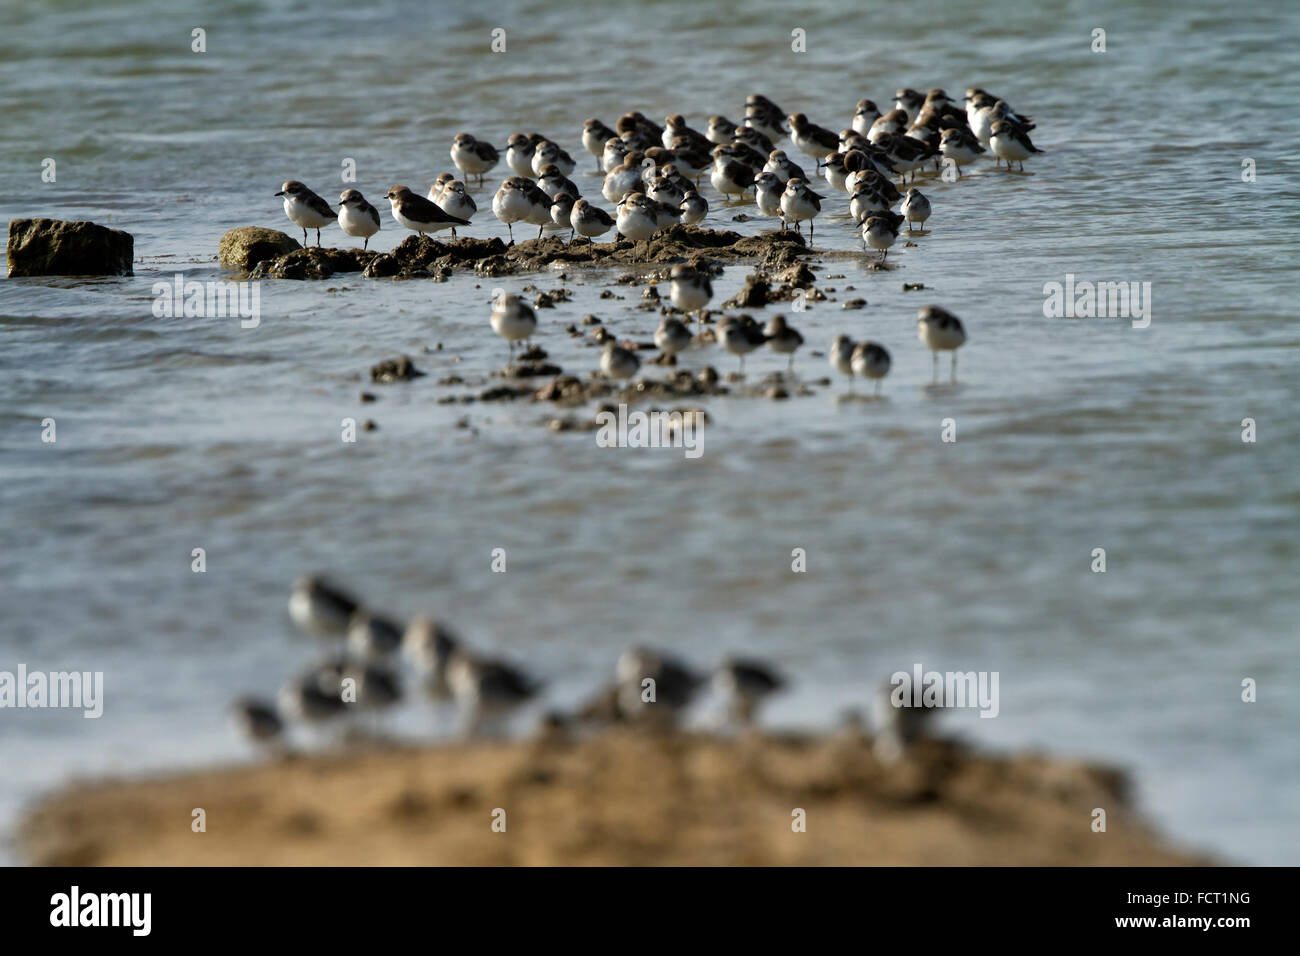 The sand plover (Charadrius mongolus) is a small wader in the plover family of birds. Stock Photo